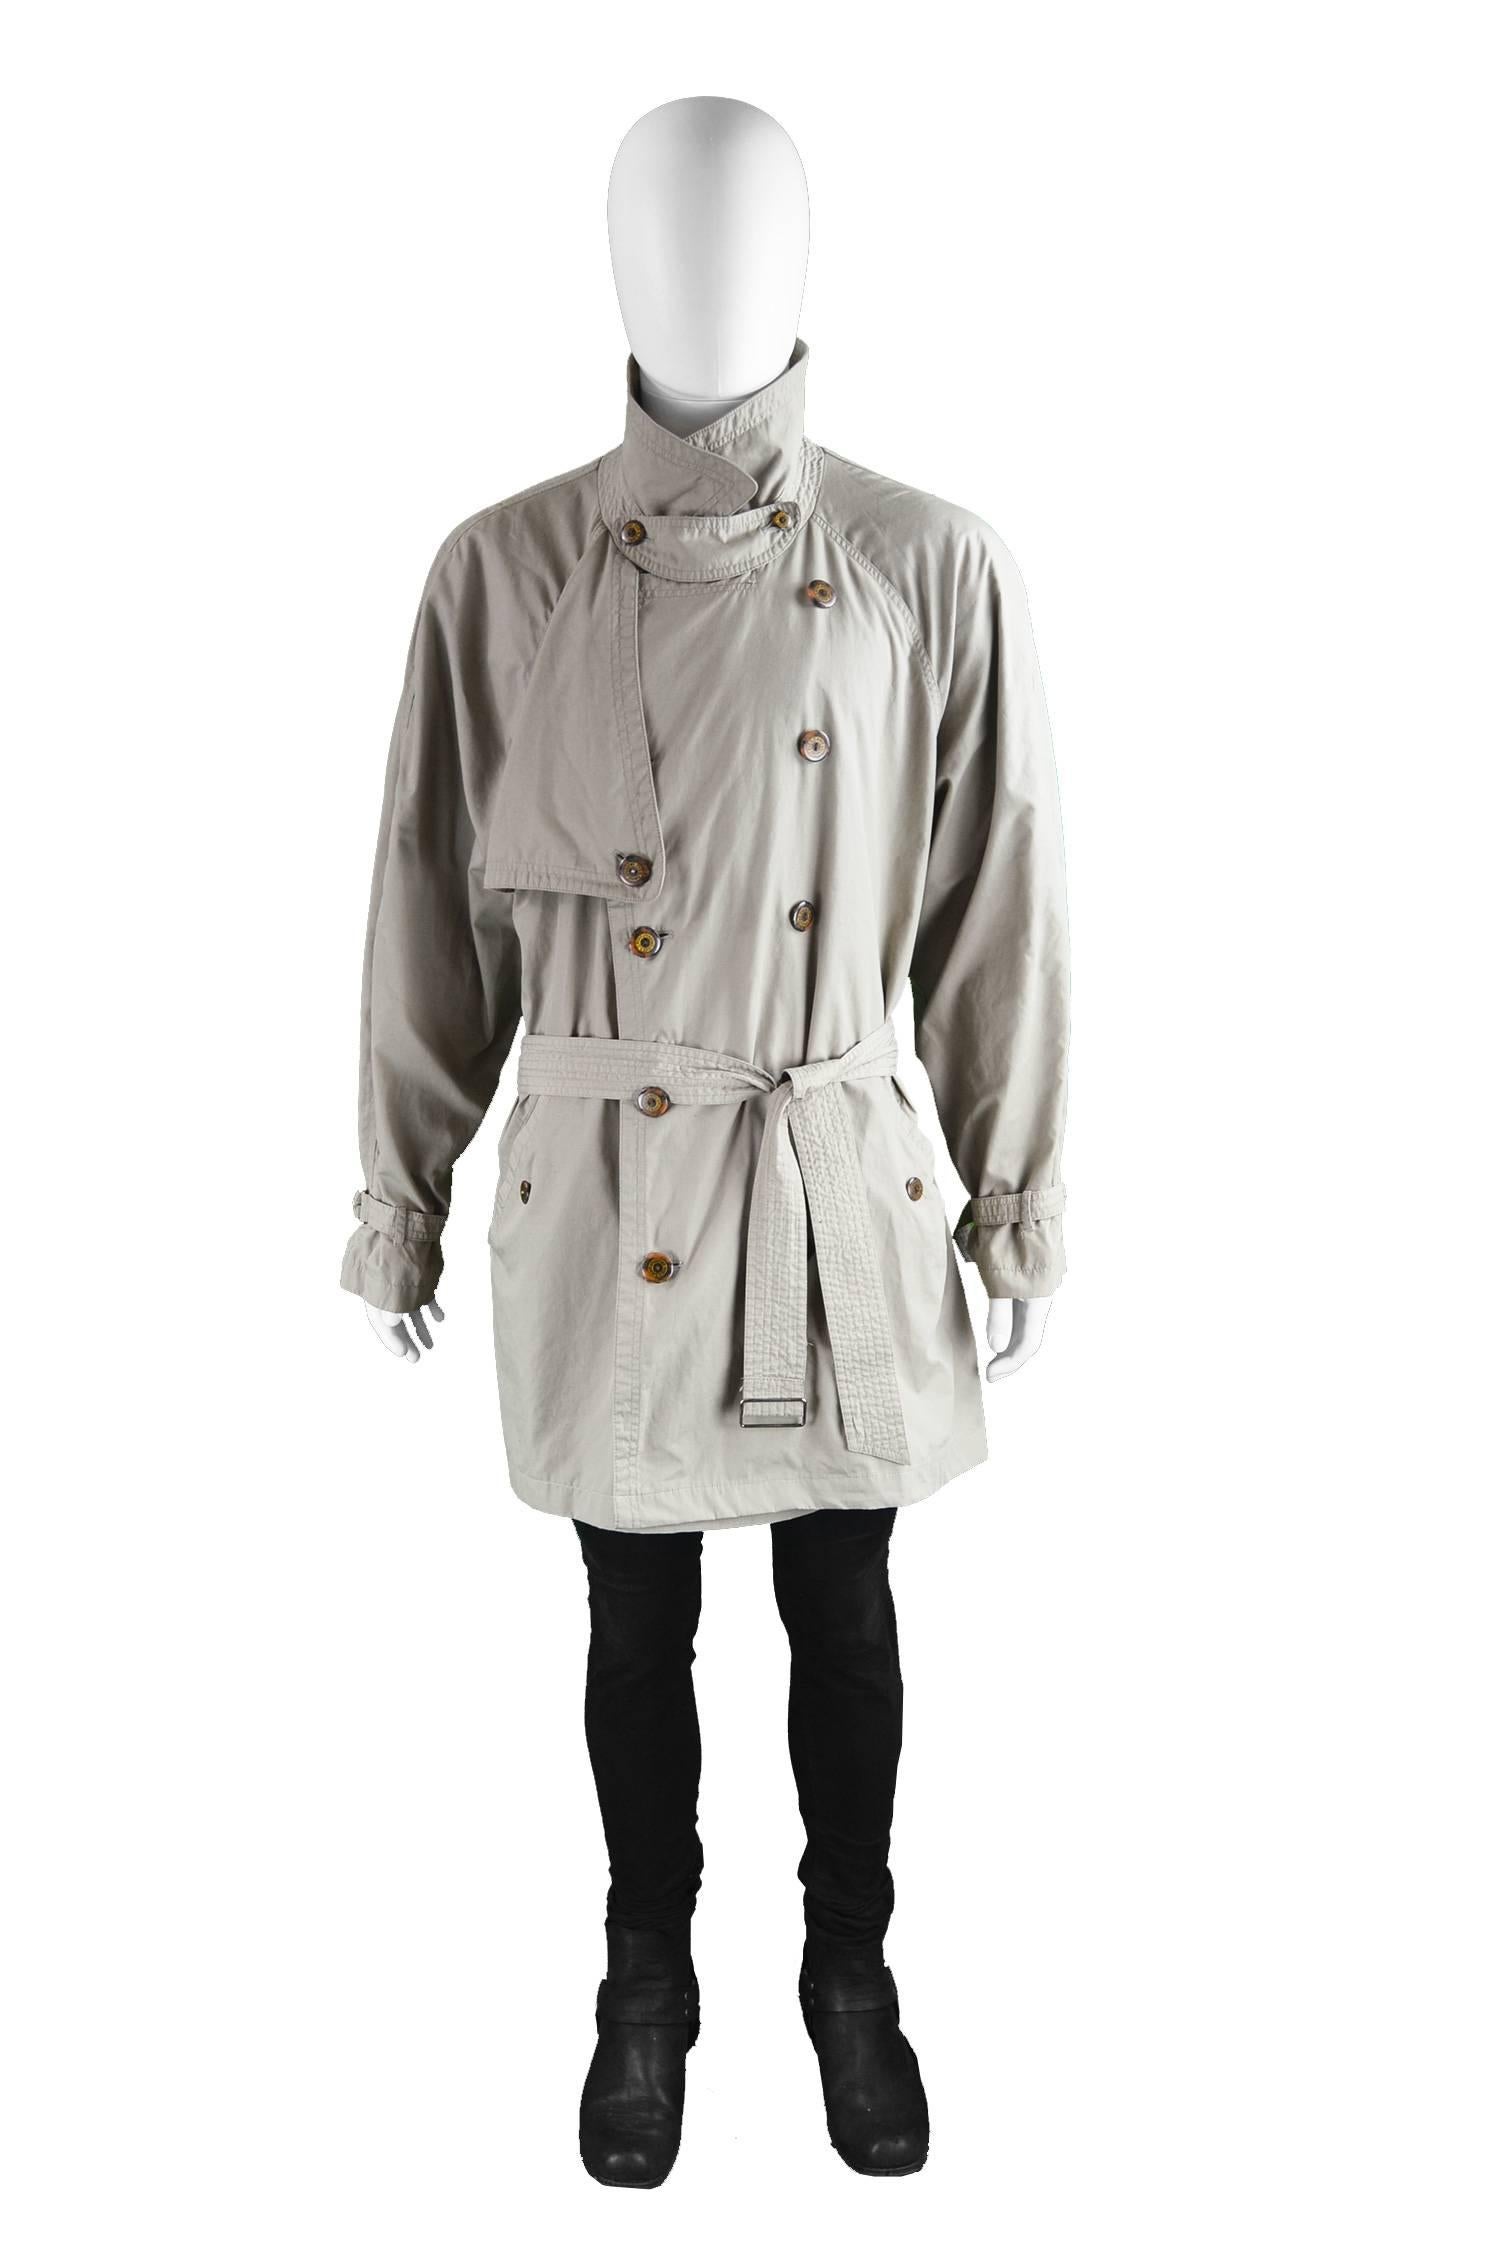 YSL Men's Lightweight Cotton Double Breasted Trenchcoat, 1990s

Size: Marked 42